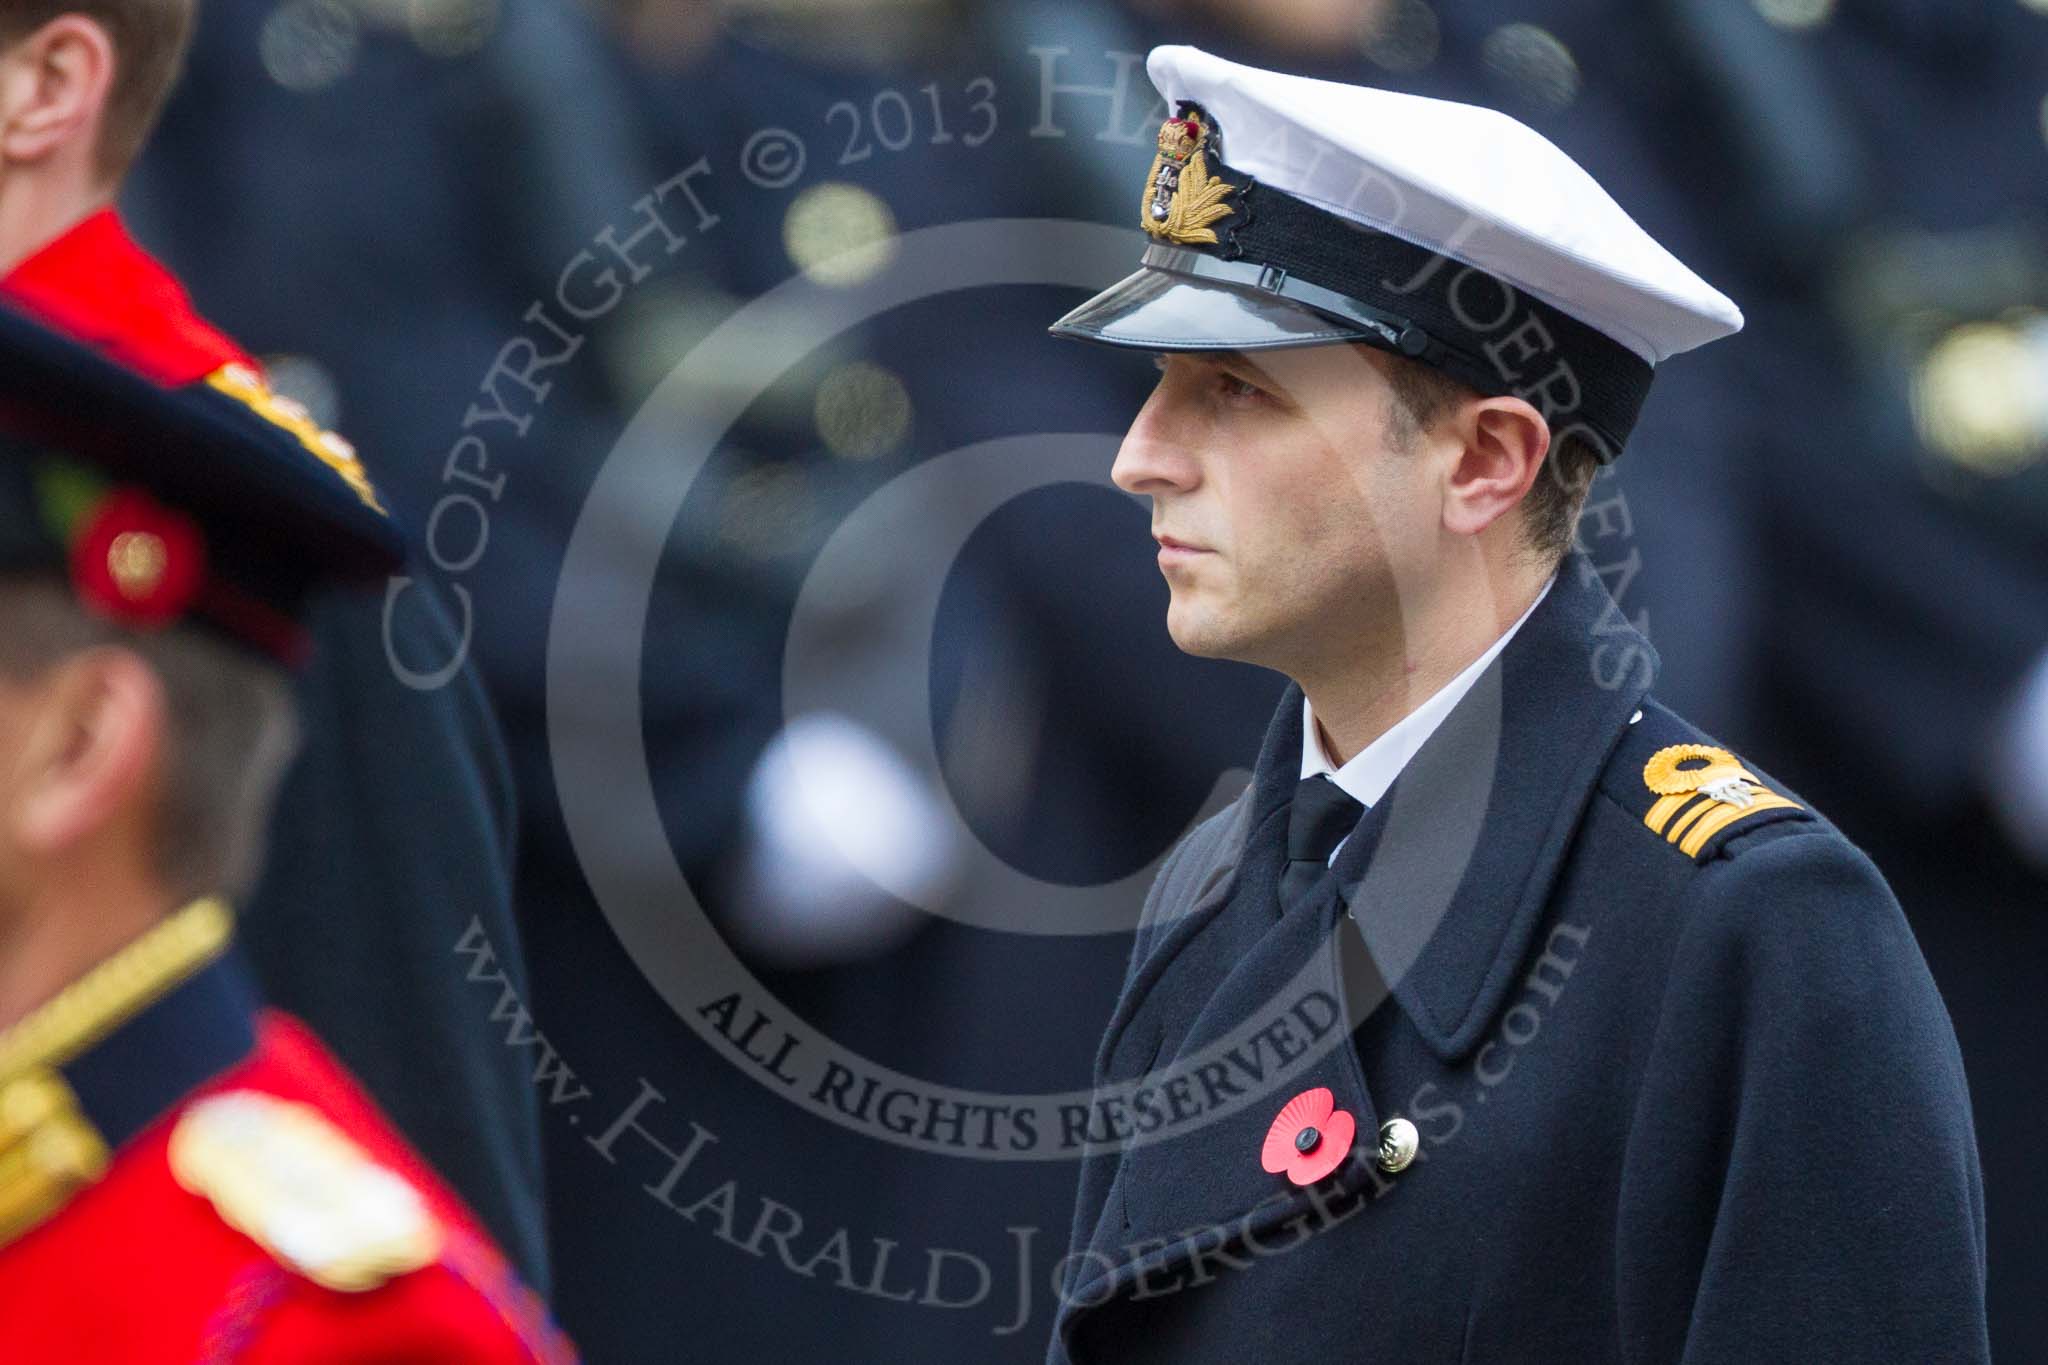 Remembrance Sunday at the Cenotaph 2015: Lieutenant Commander James Benbow, Royal Navy, equerry to Prince William. Image #281, 08 November 2015 11:14 Whitehall, London, UK